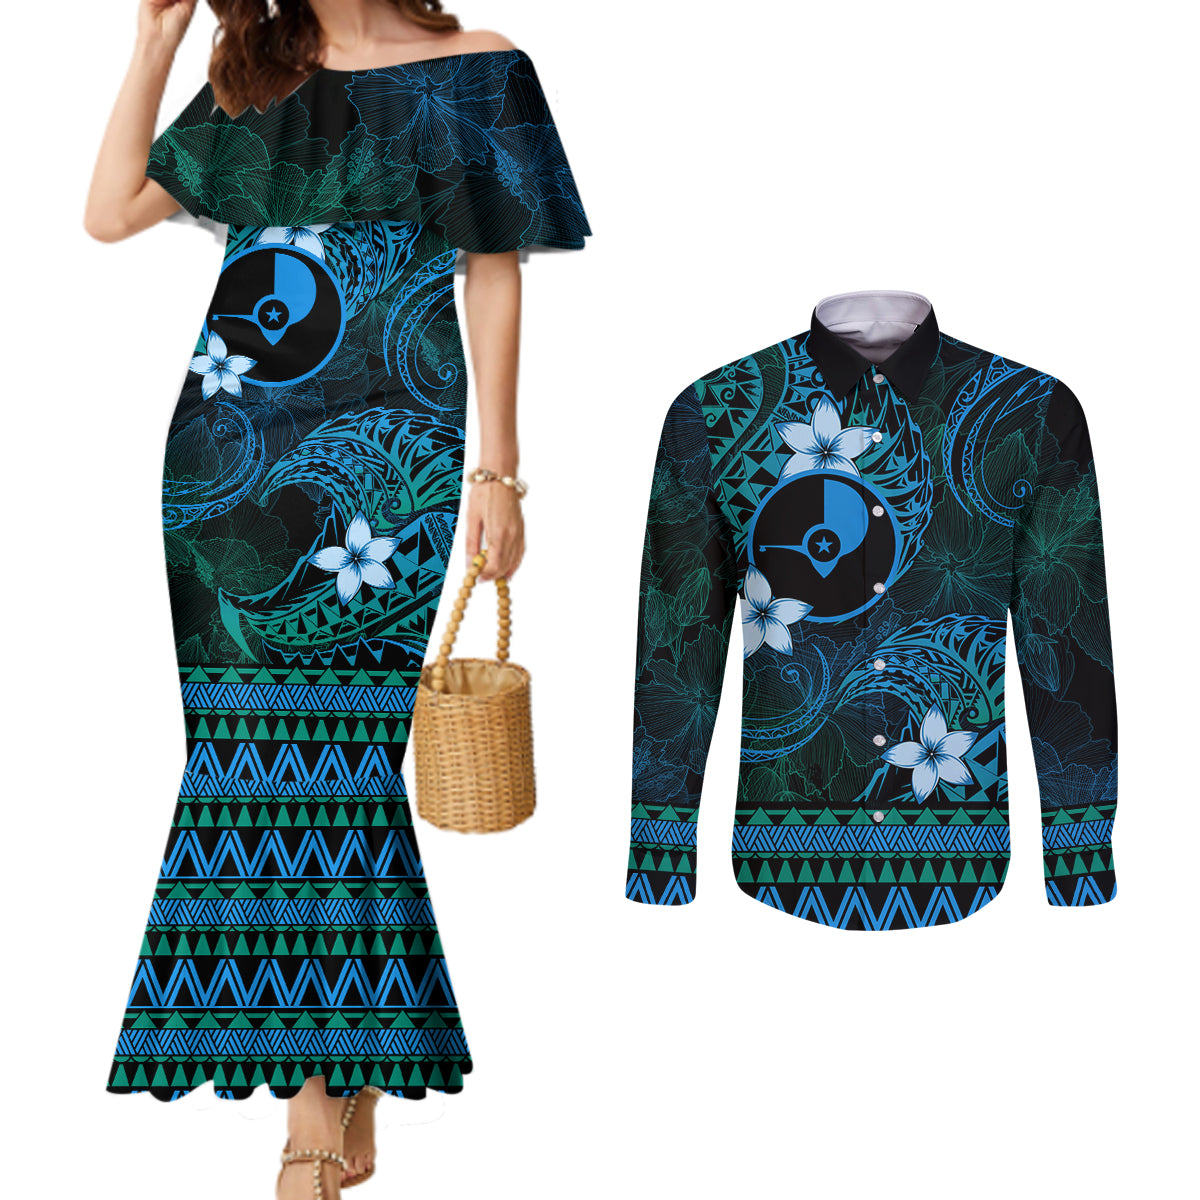 FSM Yap State Couples Matching Mermaid Dress and Long Sleeve Button Shirt Tribal Pattern Ocean Version LT01 Blue - Polynesian Pride